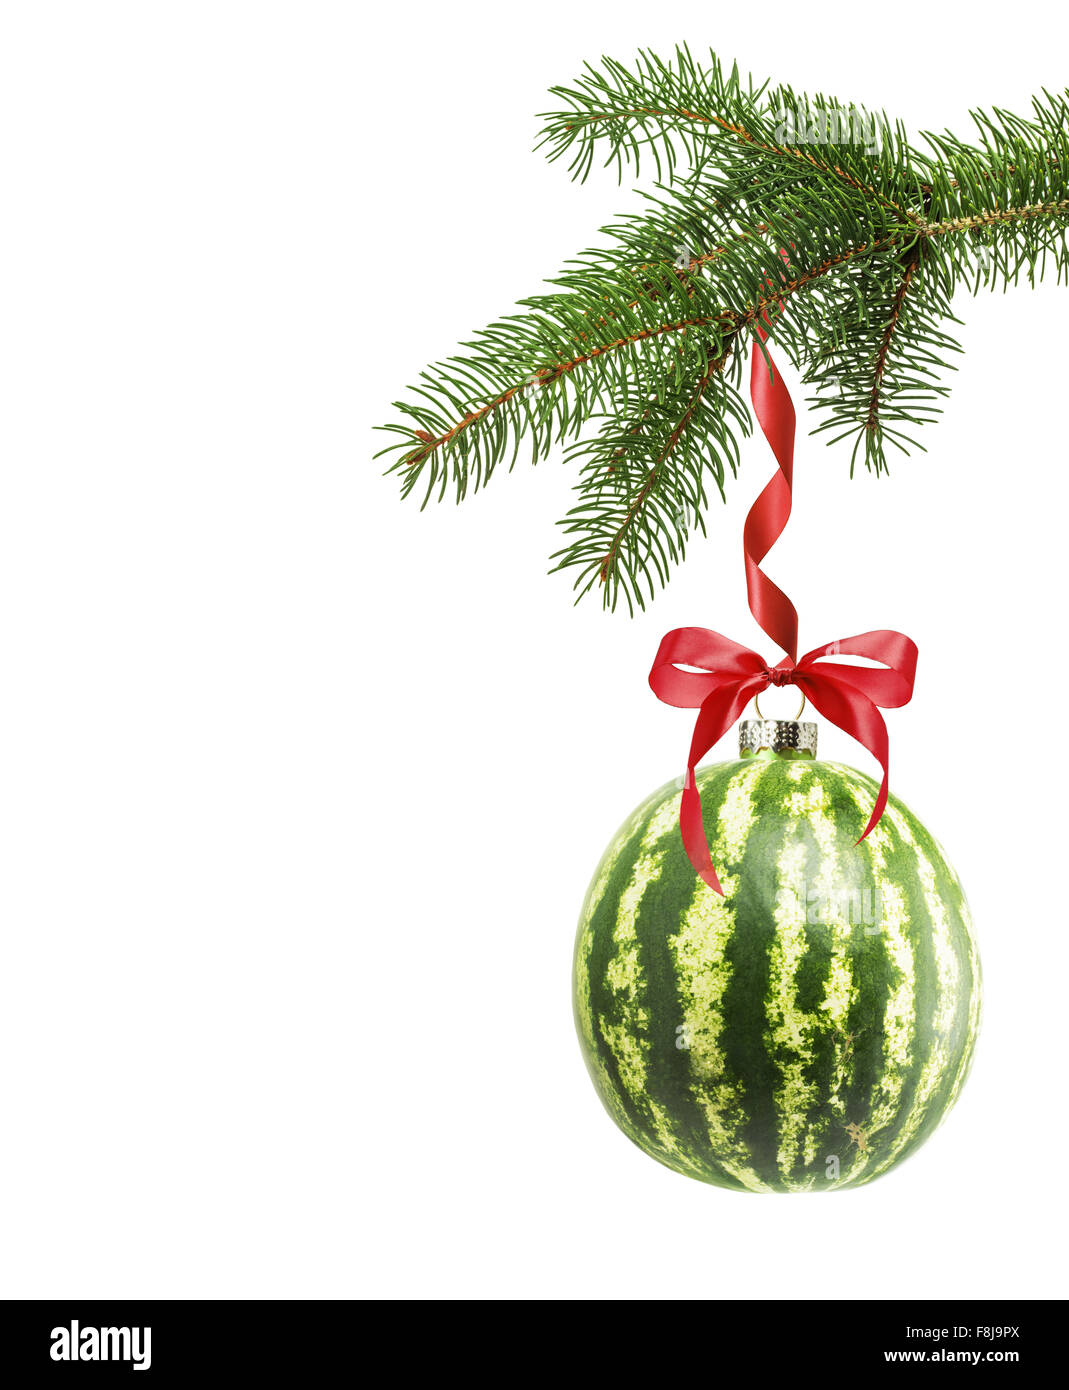 Christmas tree branch with Christmas ball in shape of watermelon isolated on the white background. Stock Photo